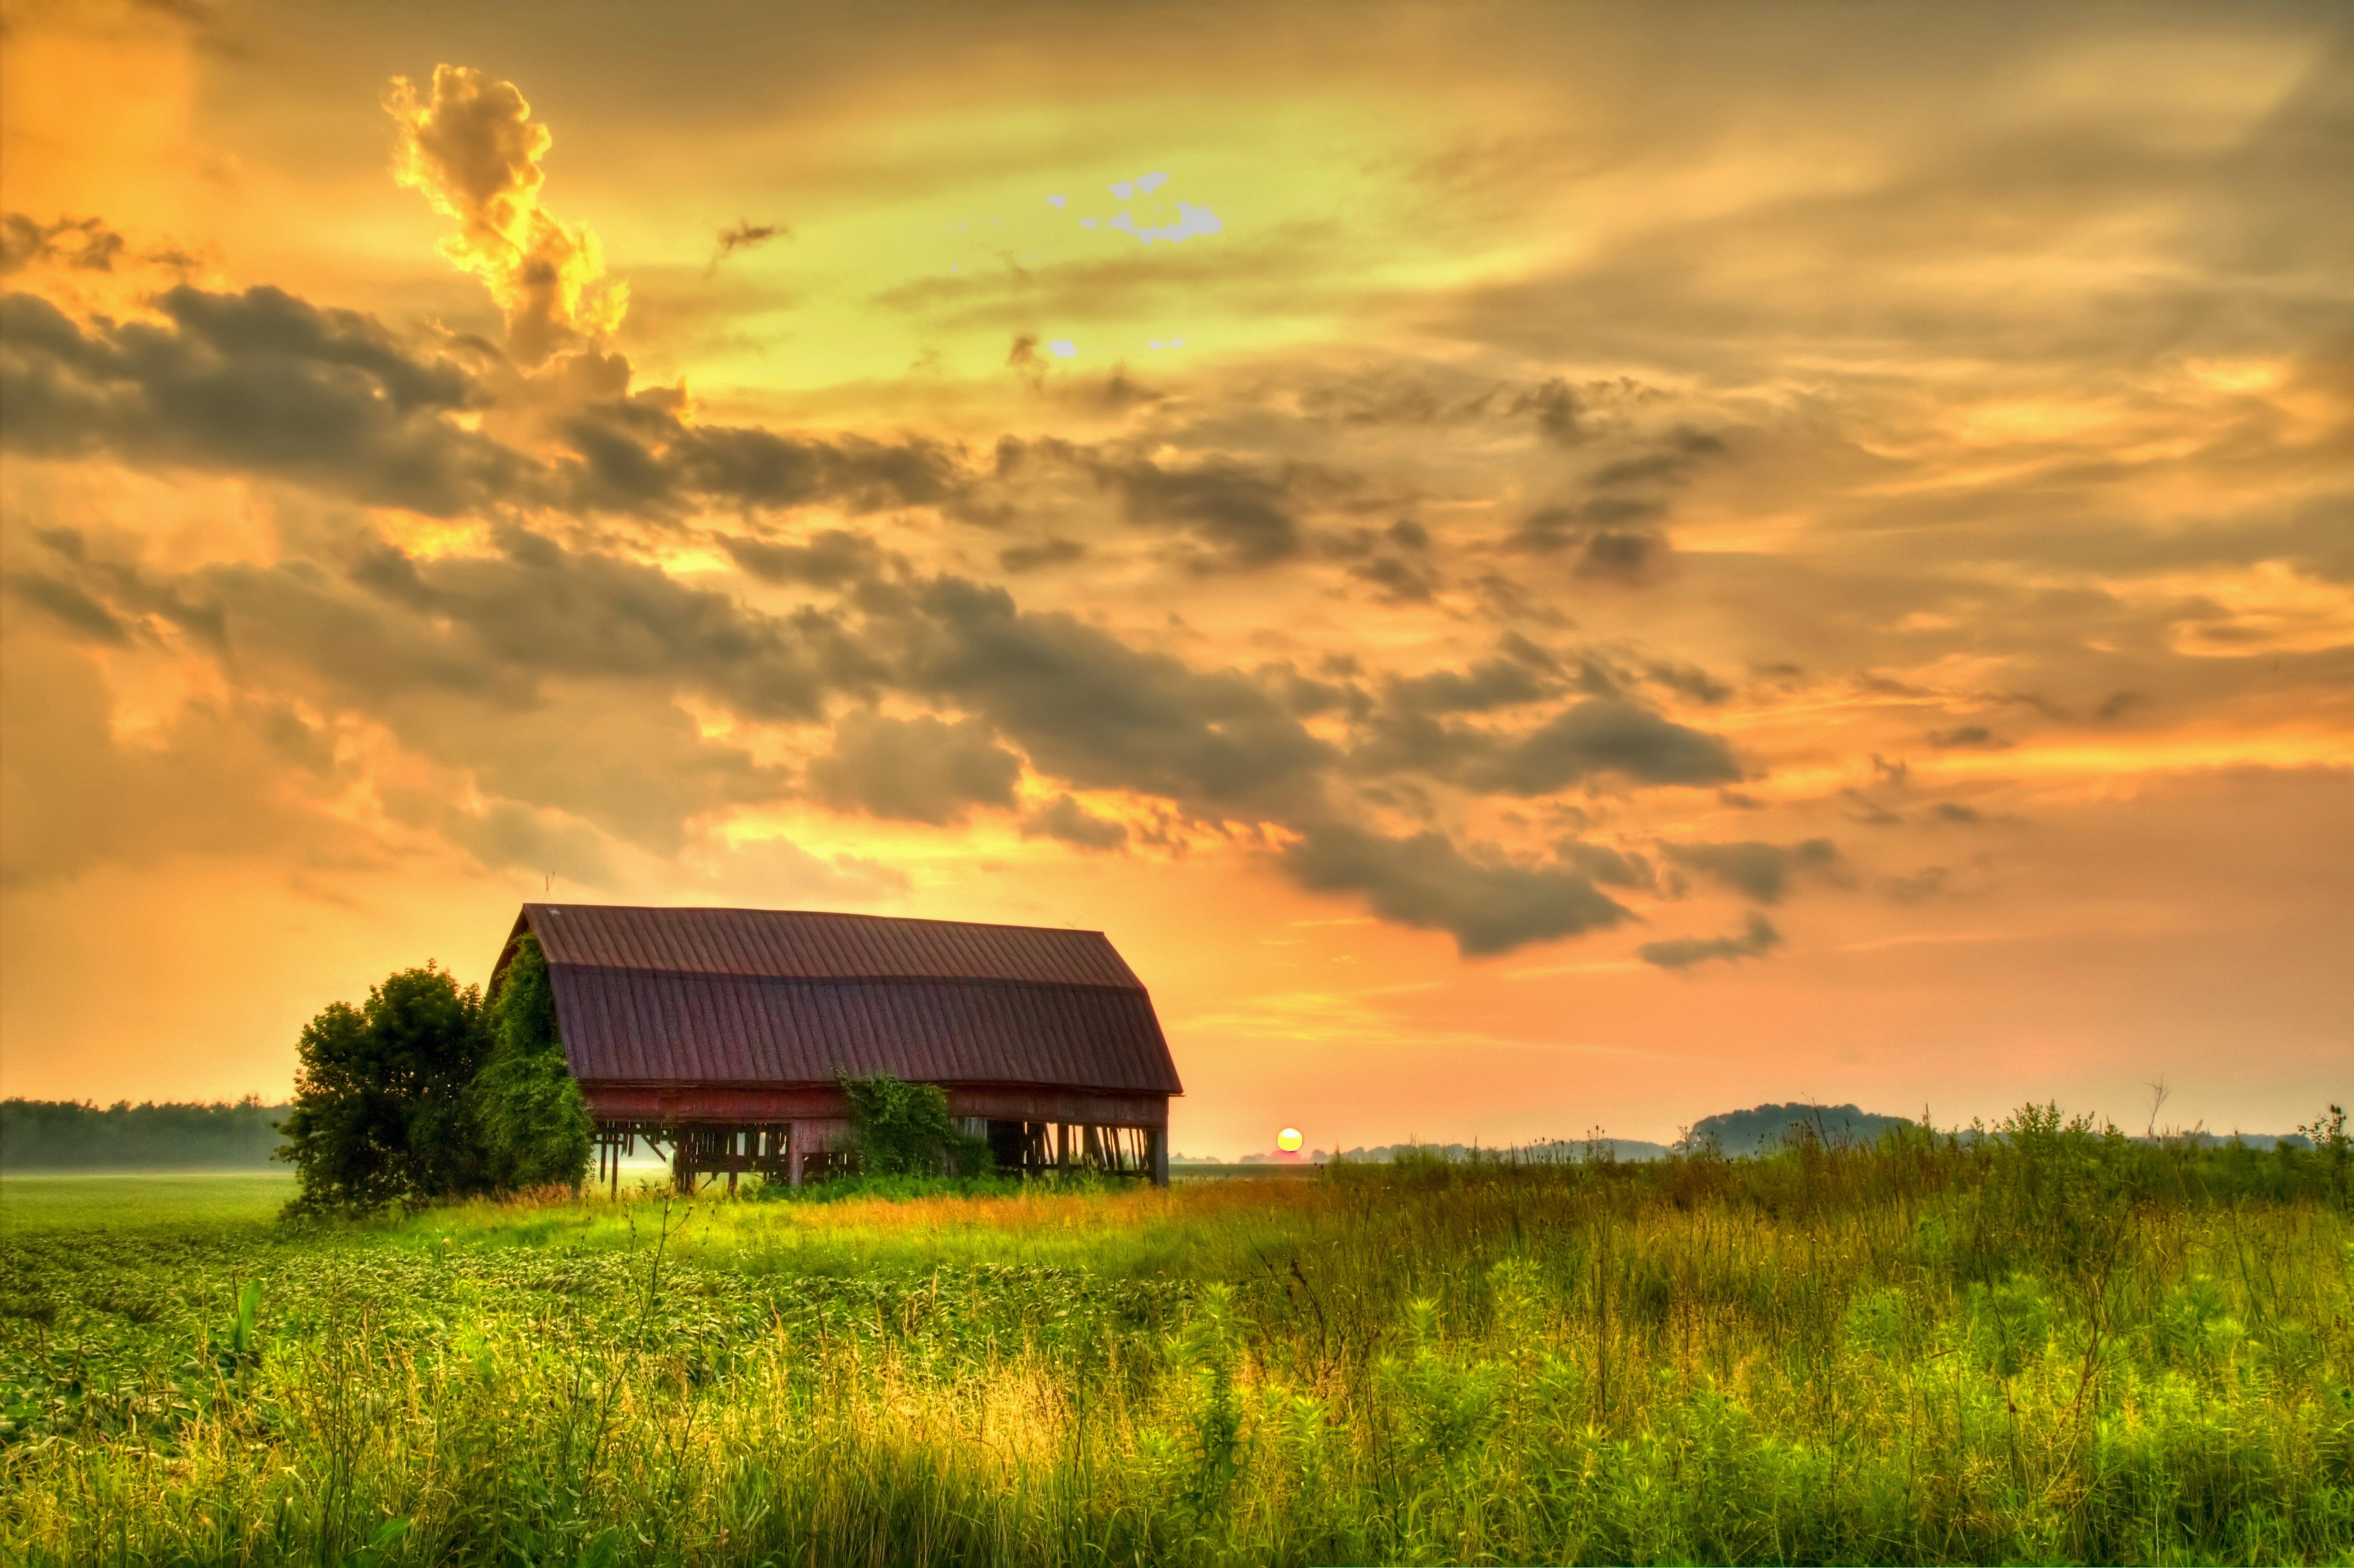 A sunset over a barn structure